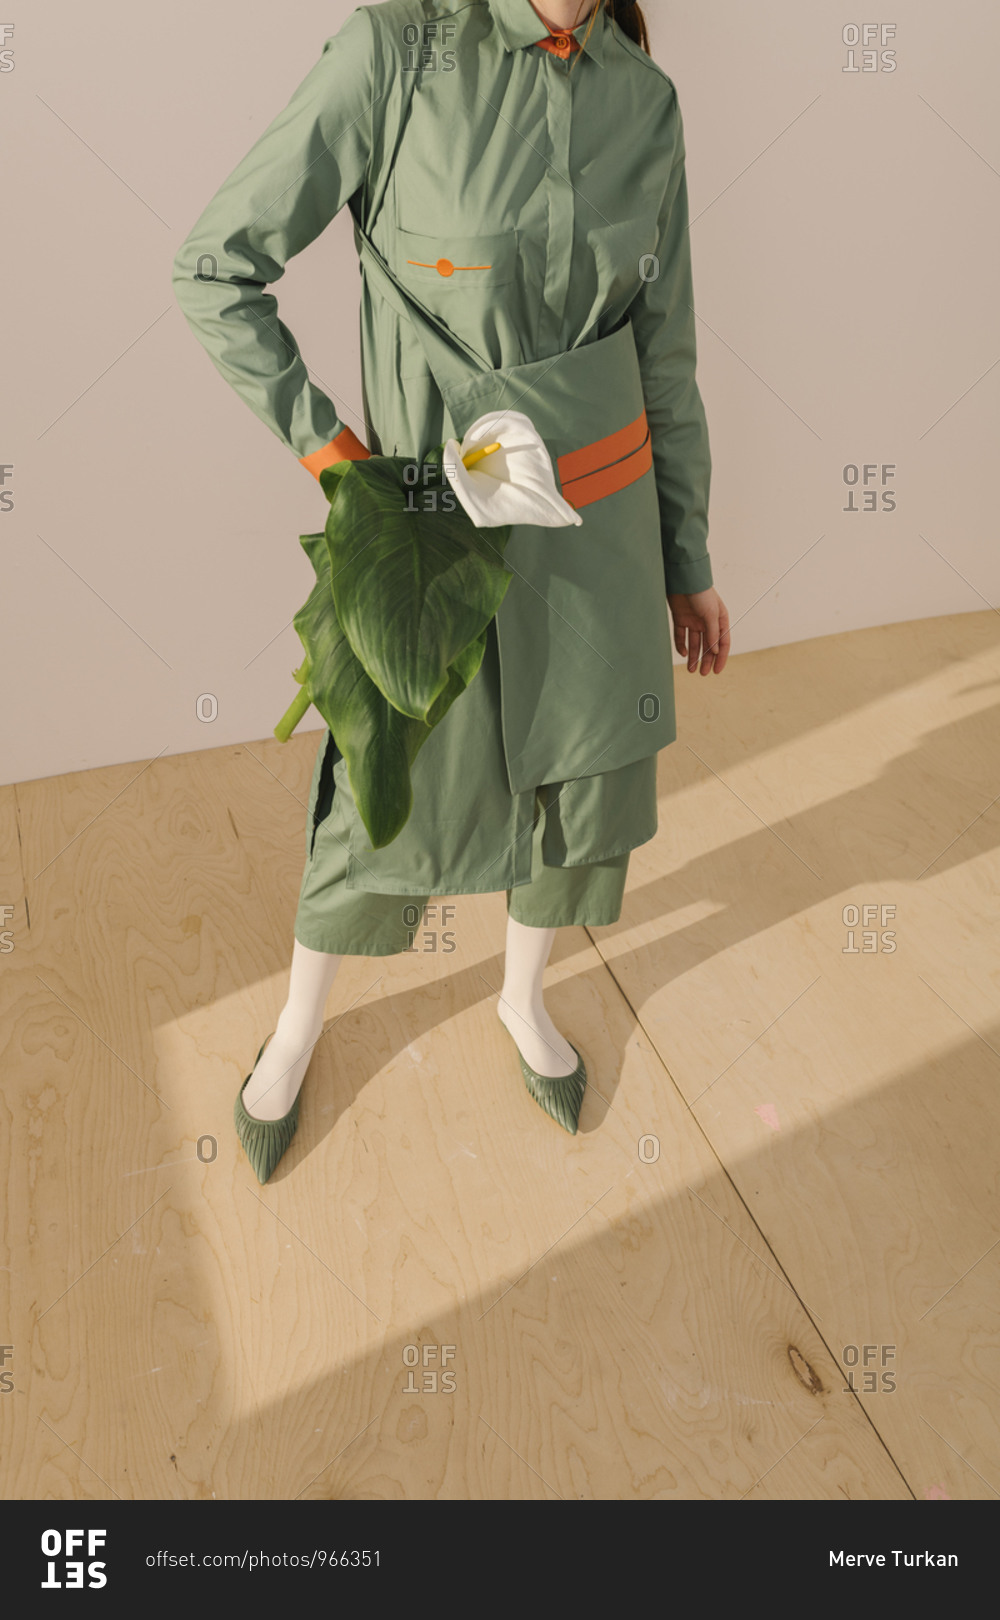 Model Dressed In A Light Green Outfit With Orange Detail Holding A White Calla Lily Stock Photo Offset